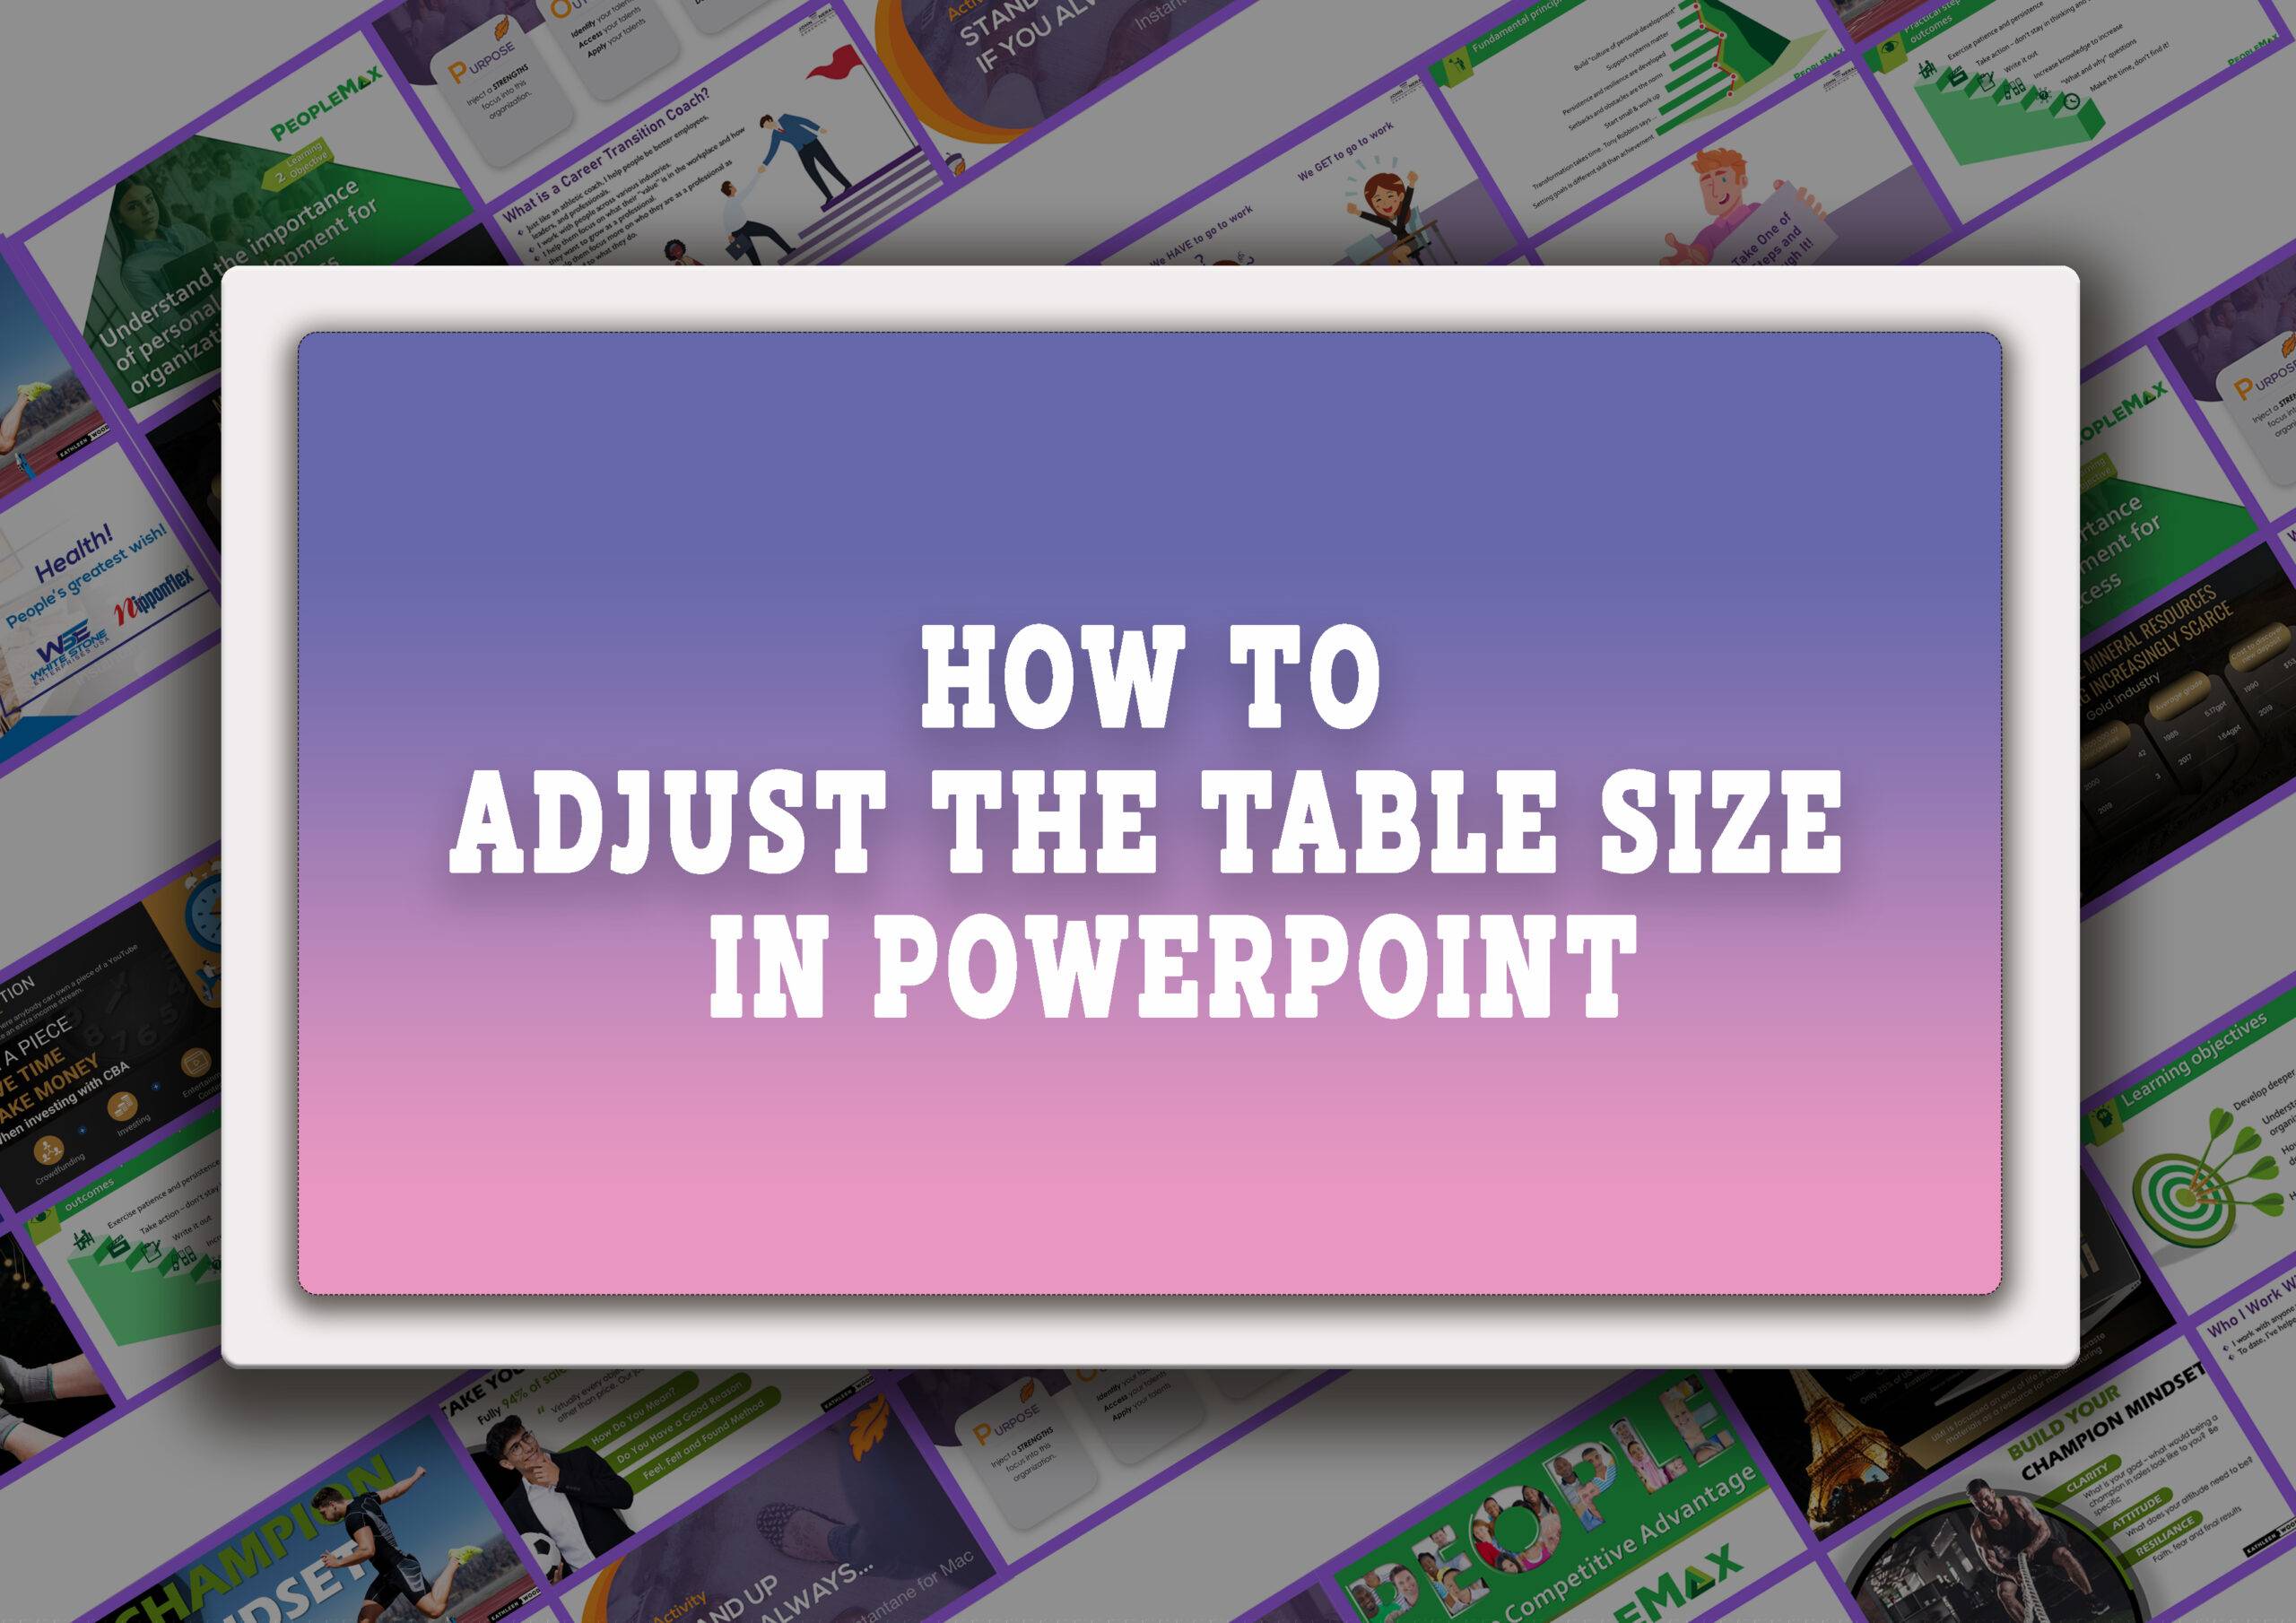 Adjusting table size in powerpoint